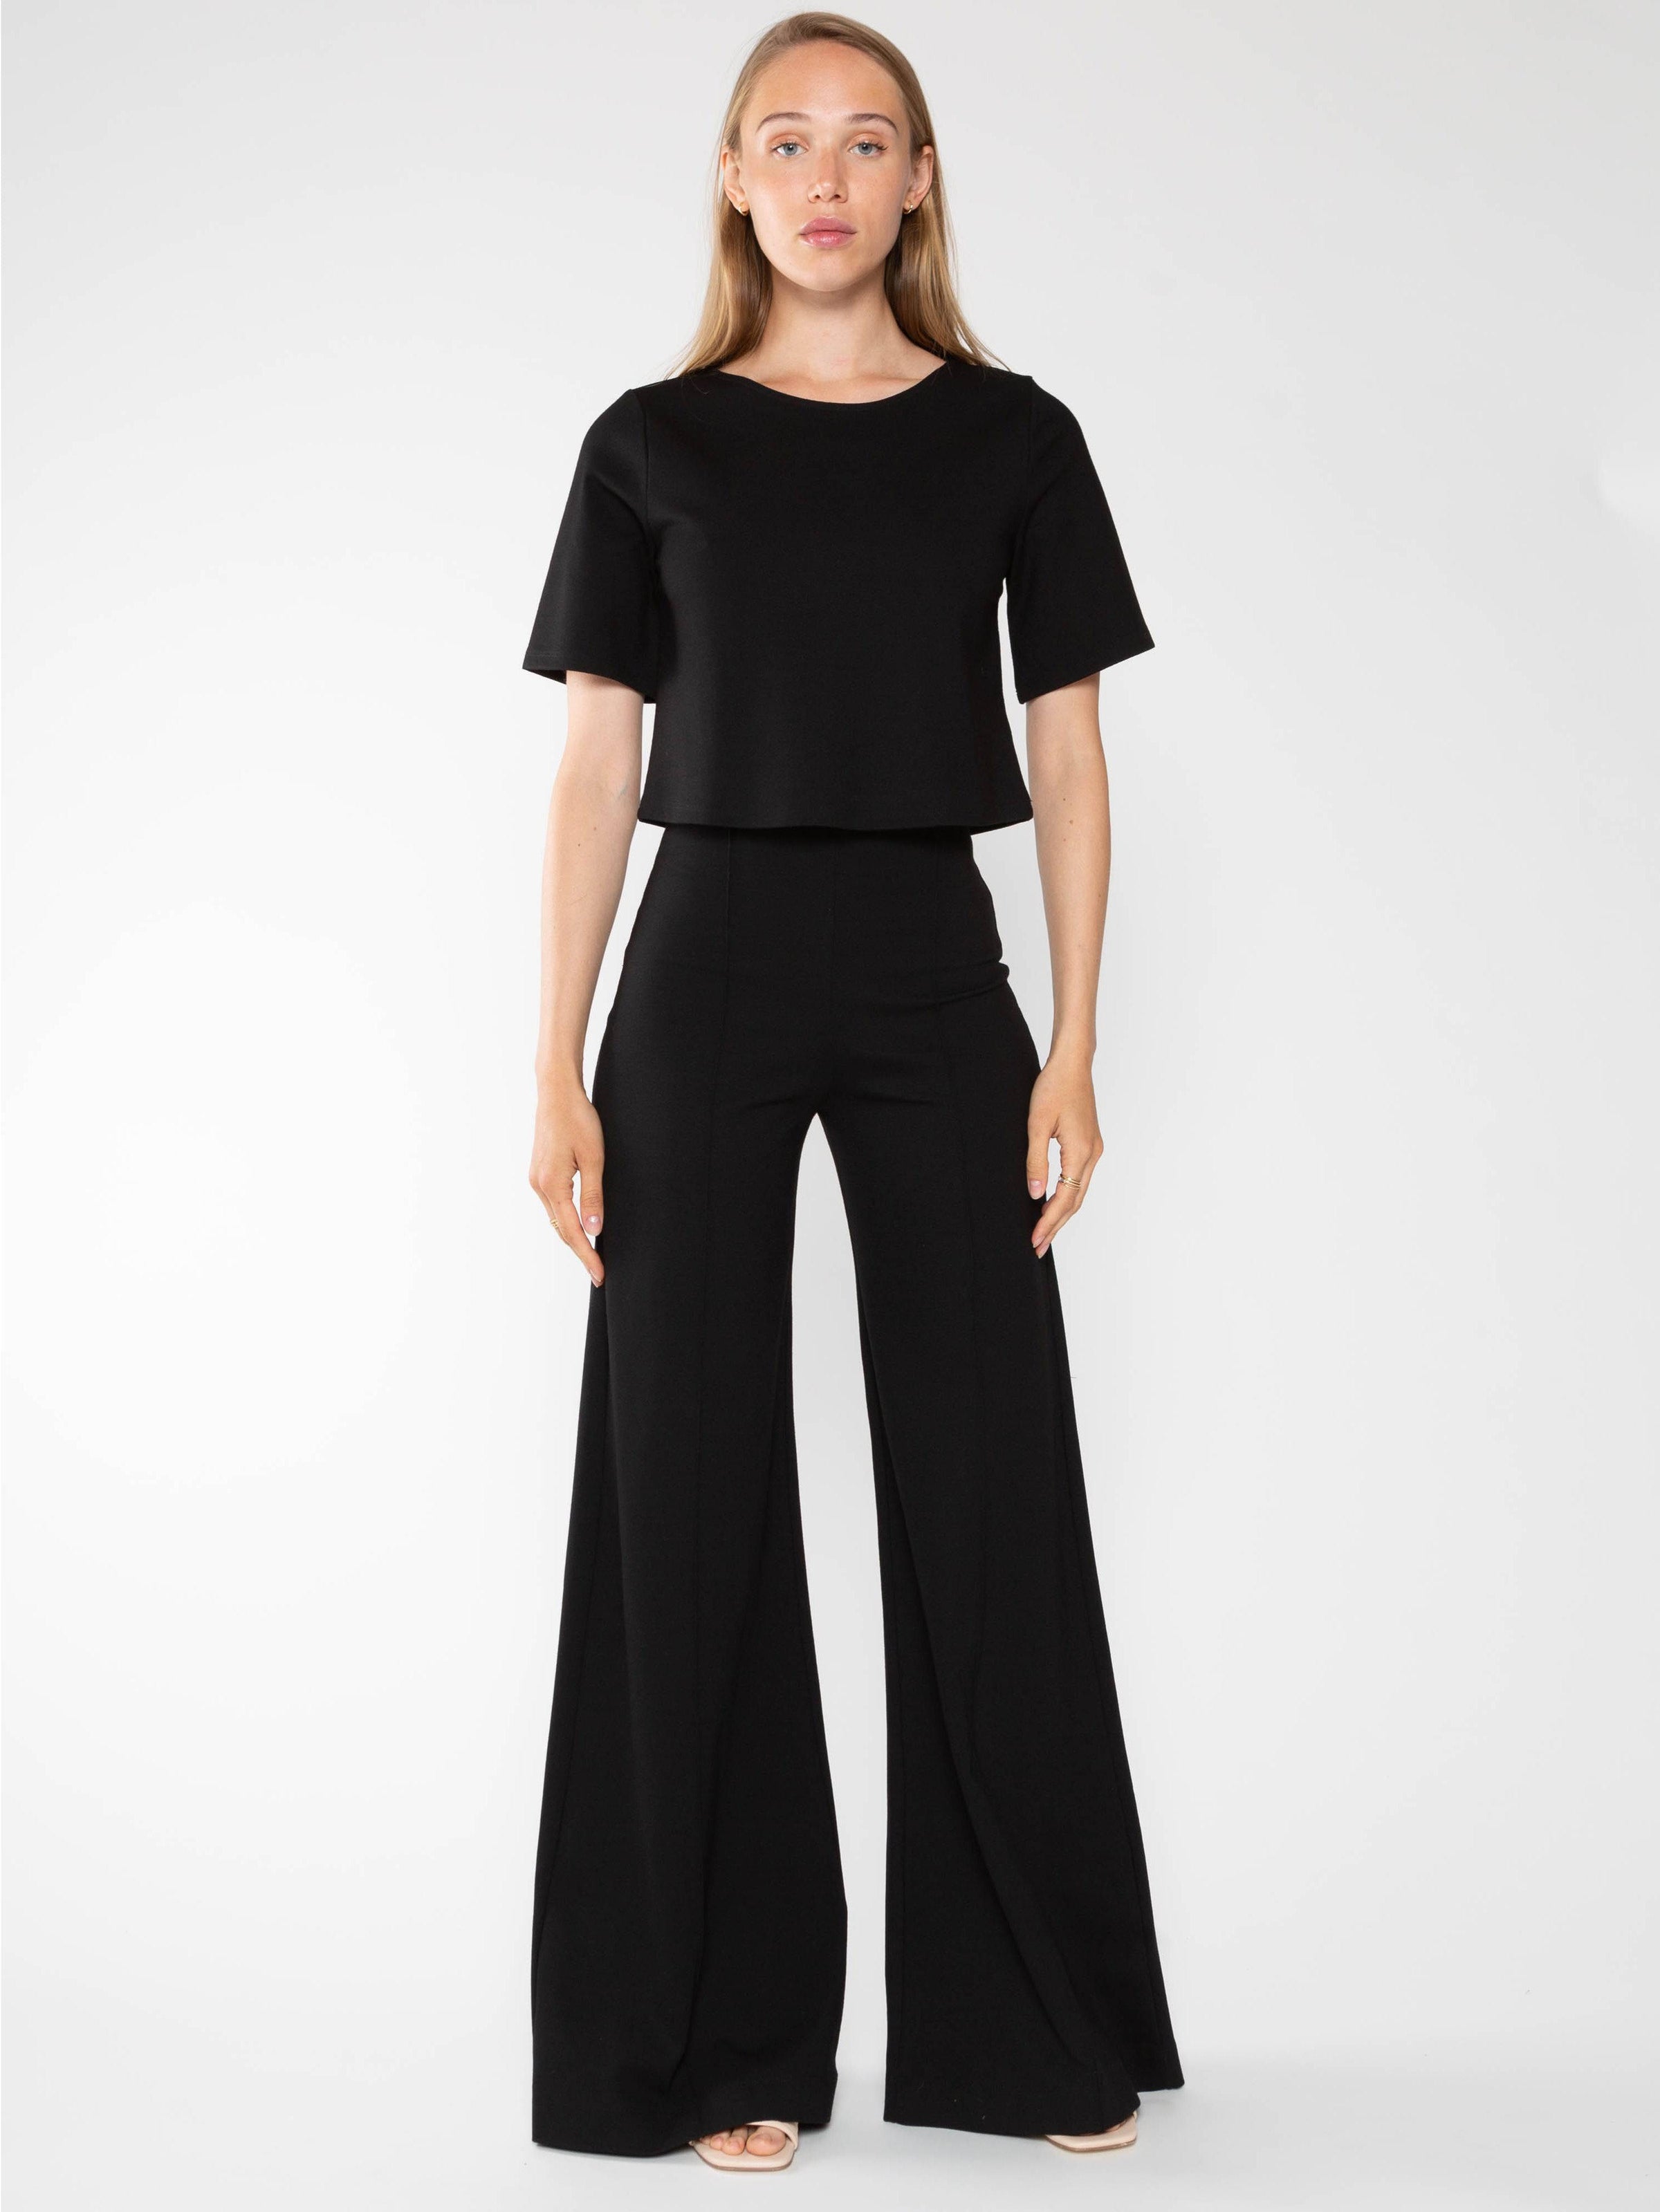 Quince + Ultra Stretch Ponte Cropped Wide Leg Pant